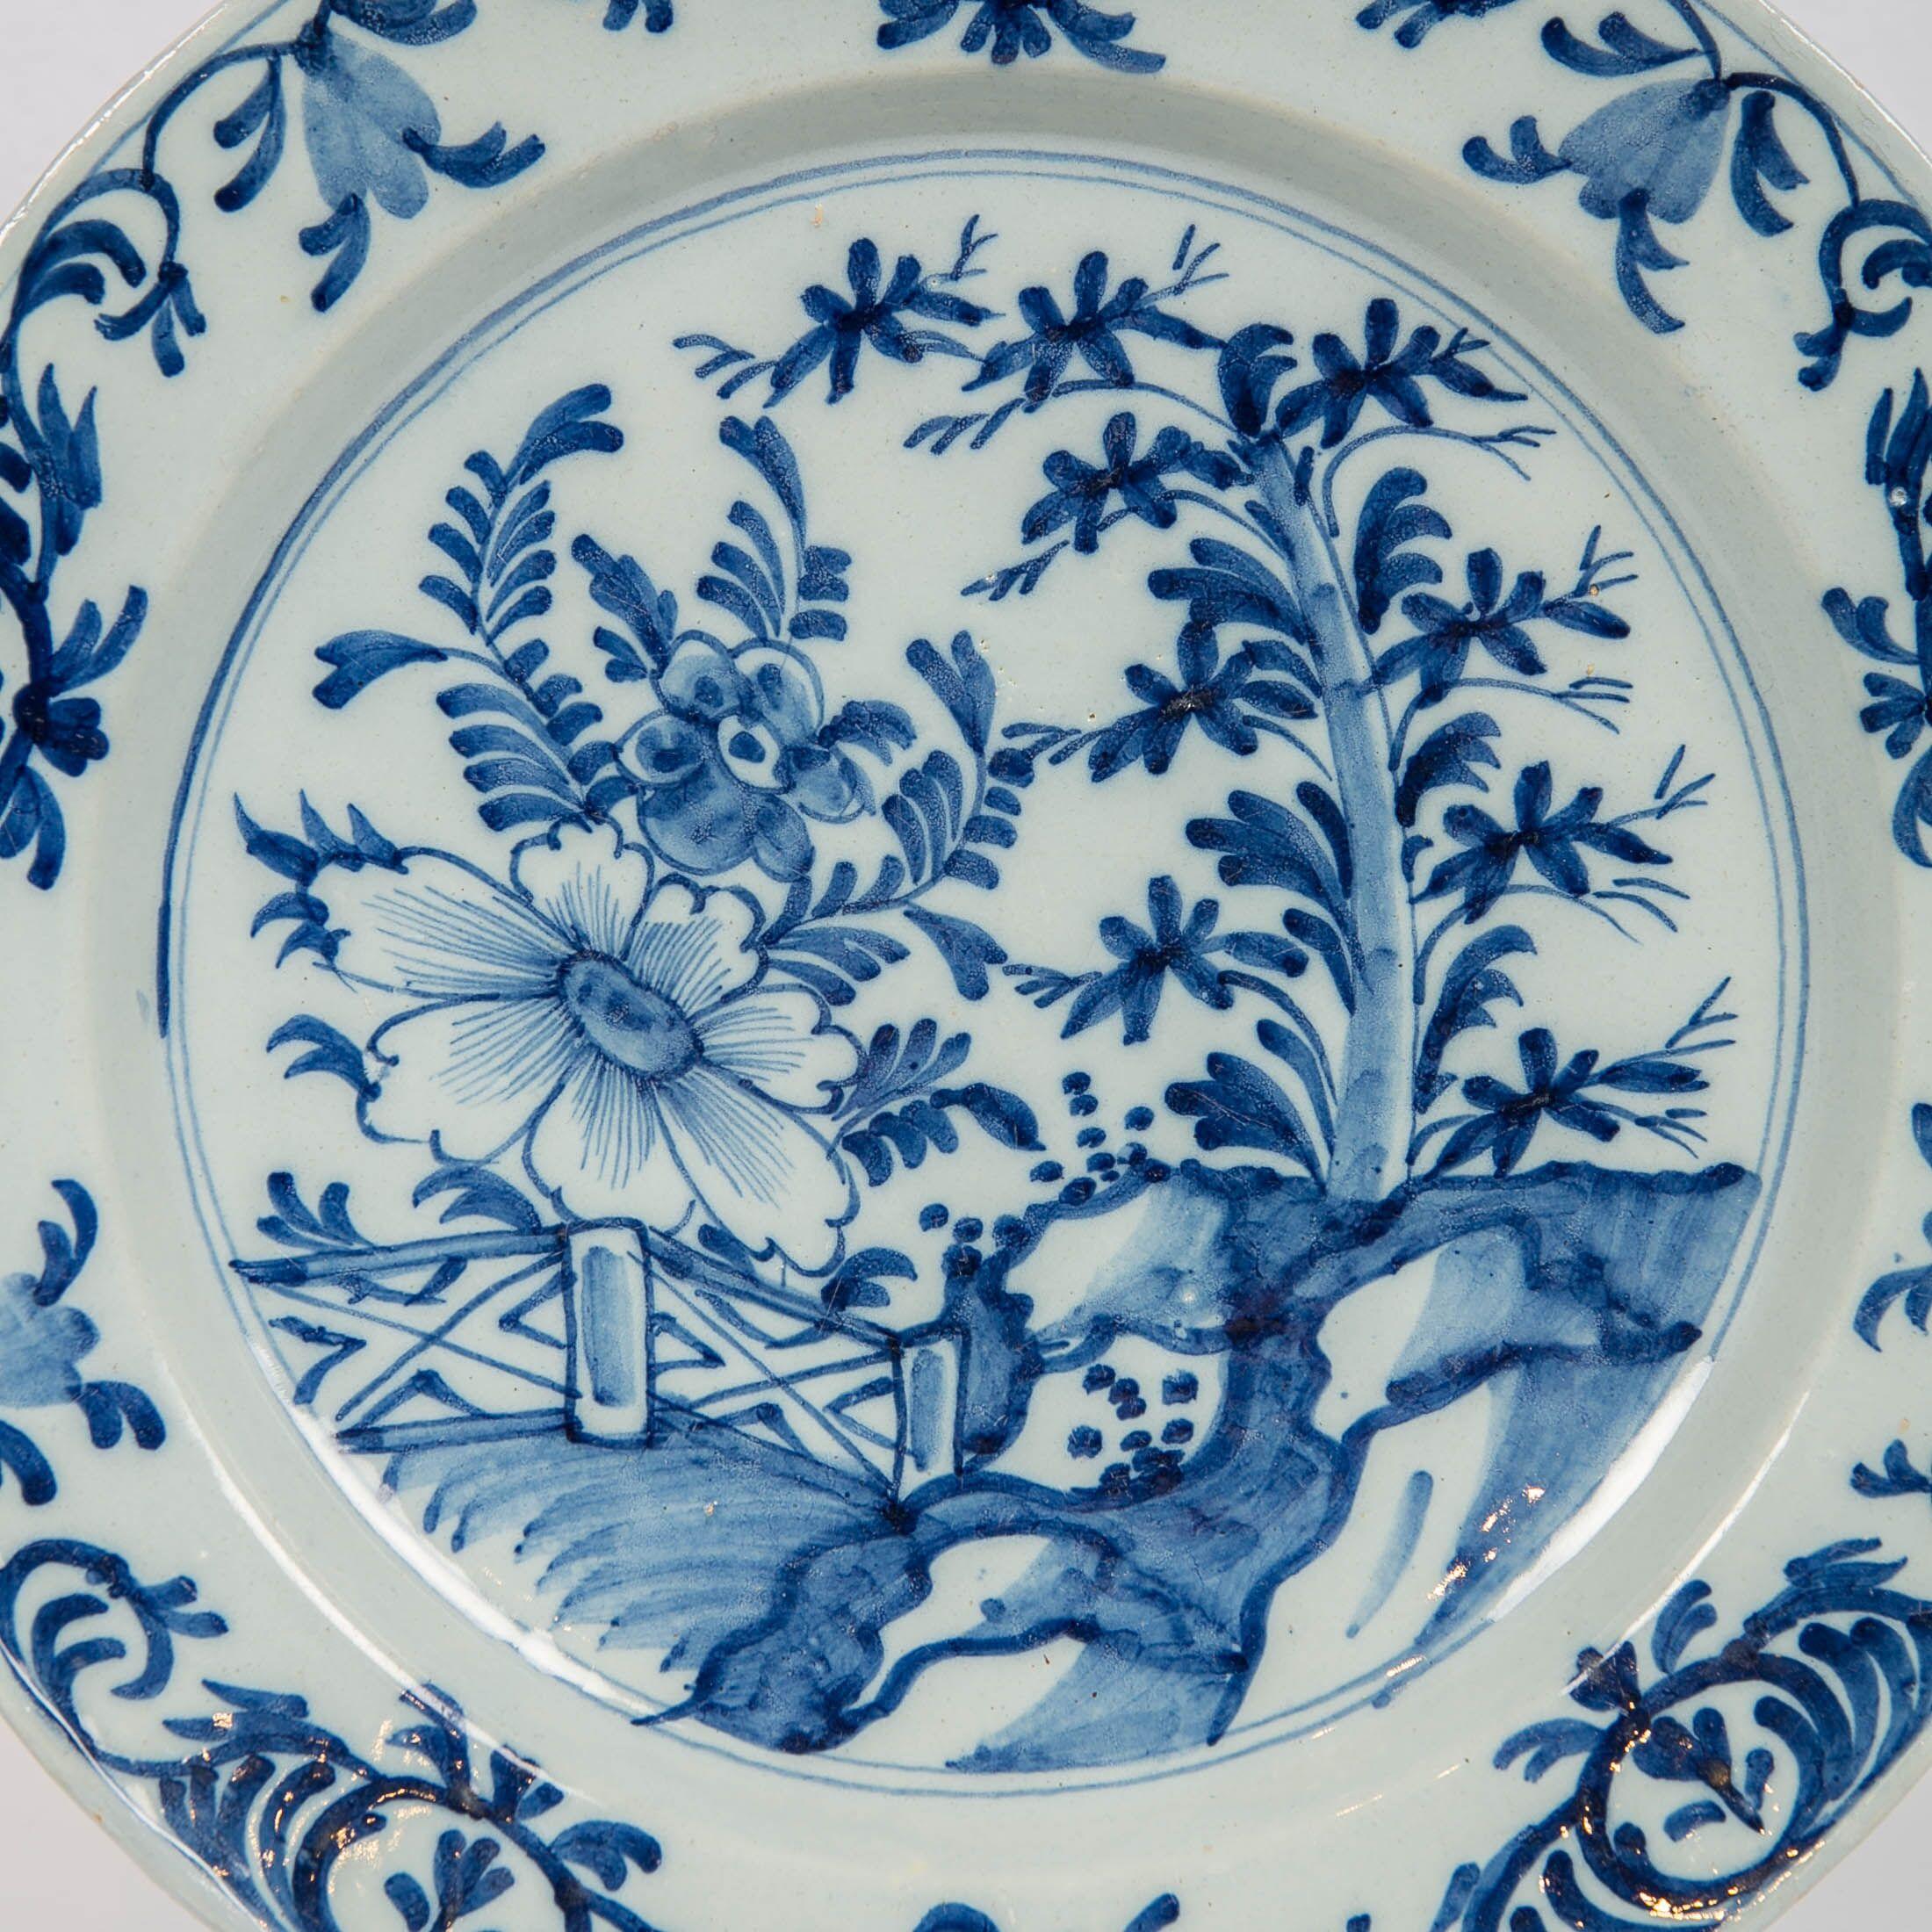 We are pleased to offer this antique Dutch delft blue and white charger made in the 18th century, circa 1780. The center is painted in a variety of shades of cobalt blue showing a garden scene with a pine tree, a large peony, and a garden fence. The